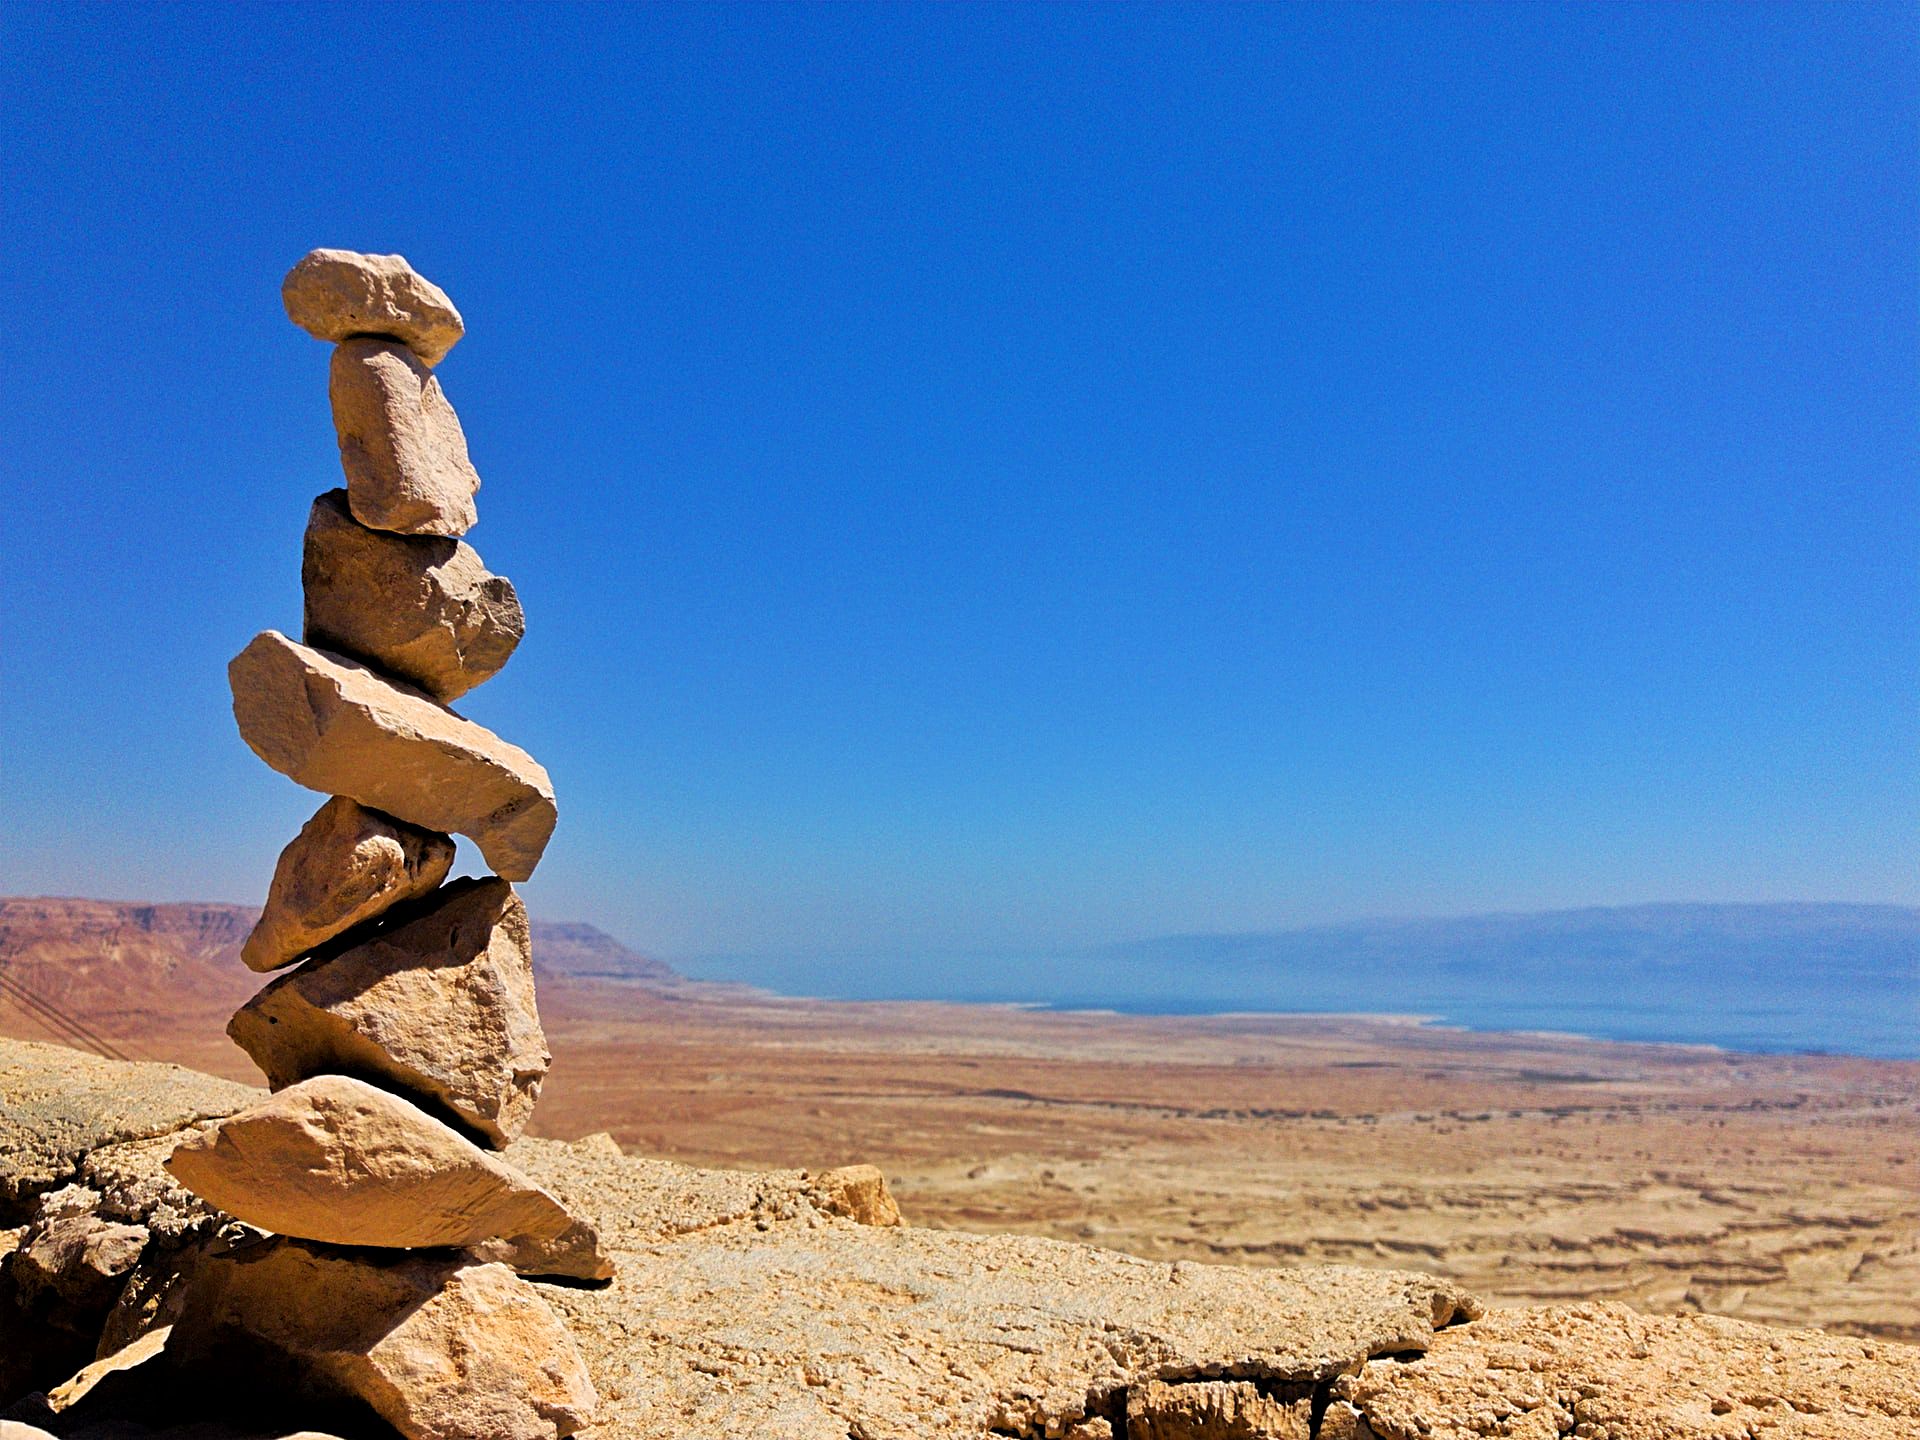 Hiking by the Dead Sea